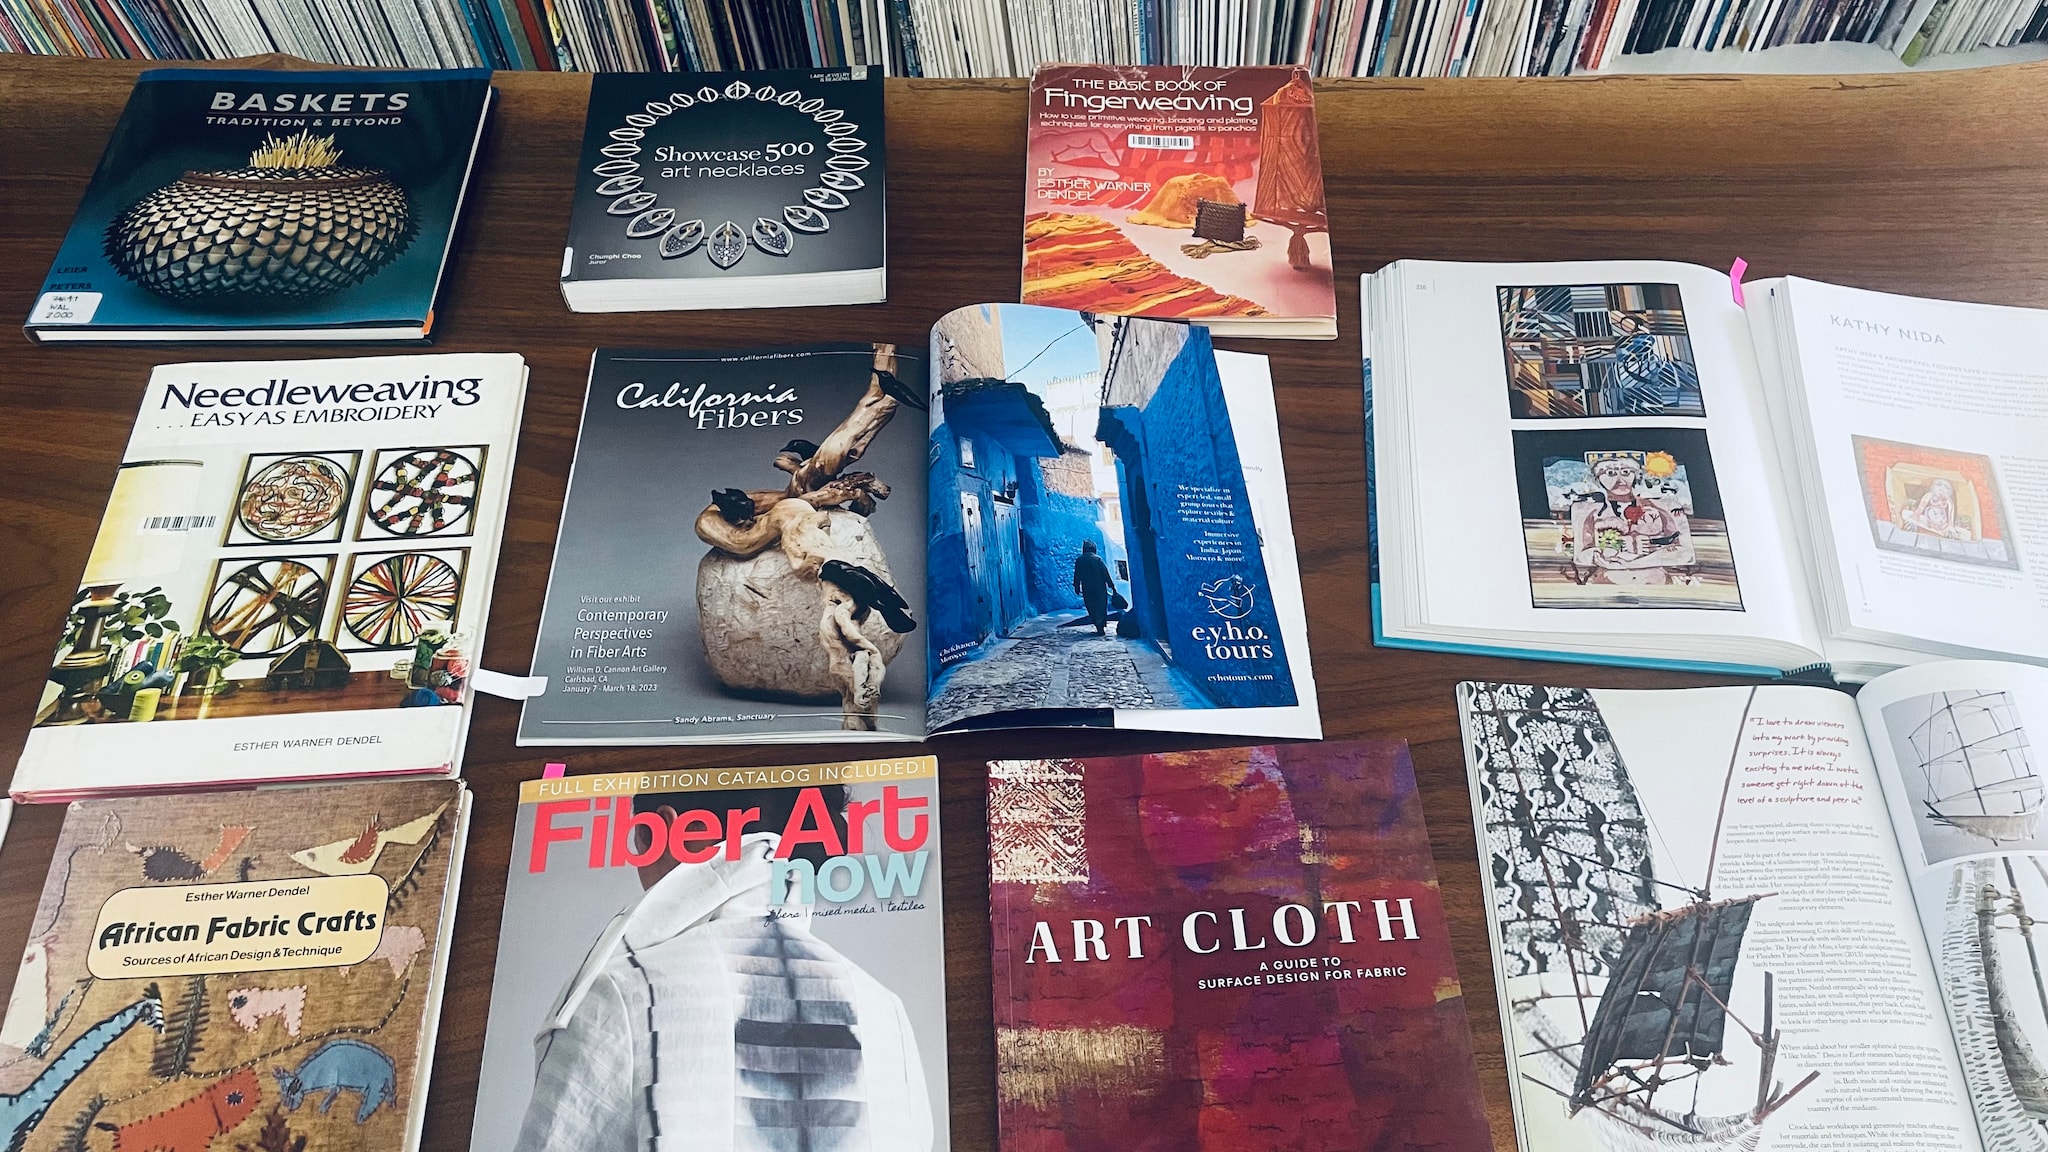 A glimpse of newly acquired "Special Collections" materials, featuring artist books, catalogues, and paper ephemera.